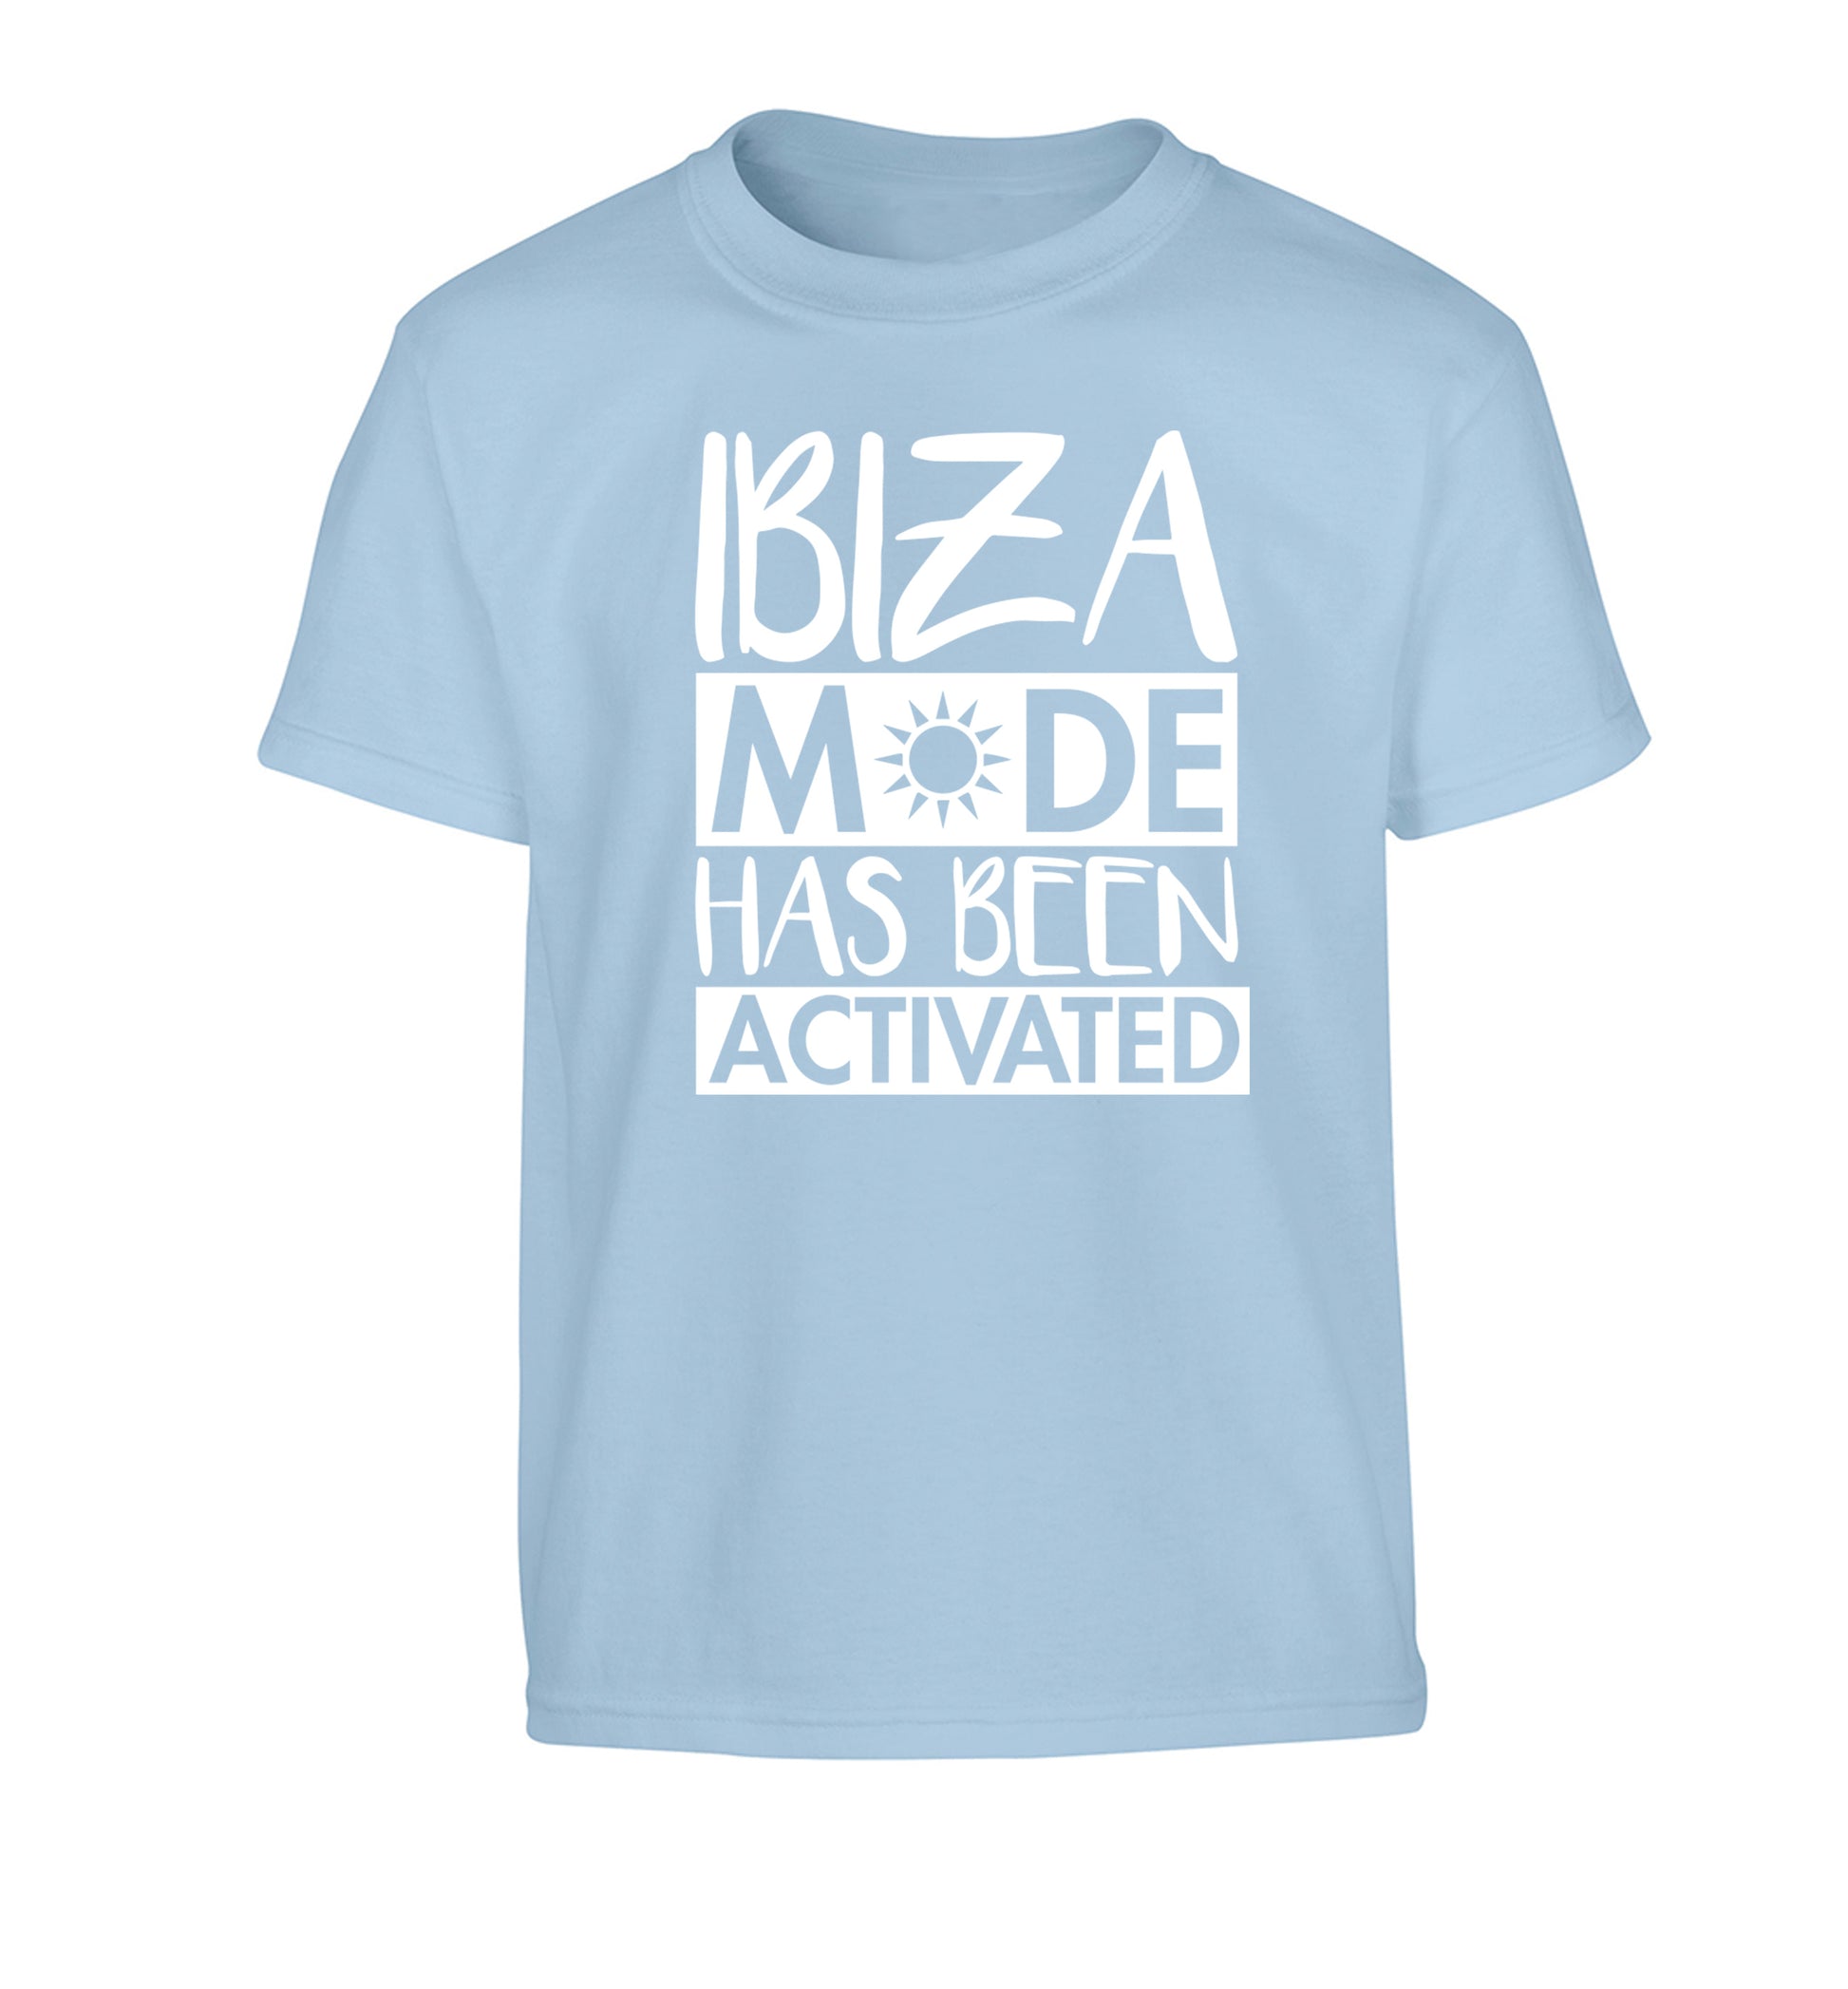 Ibiza mode has been activated Children's light blue Tshirt 12-13 Years